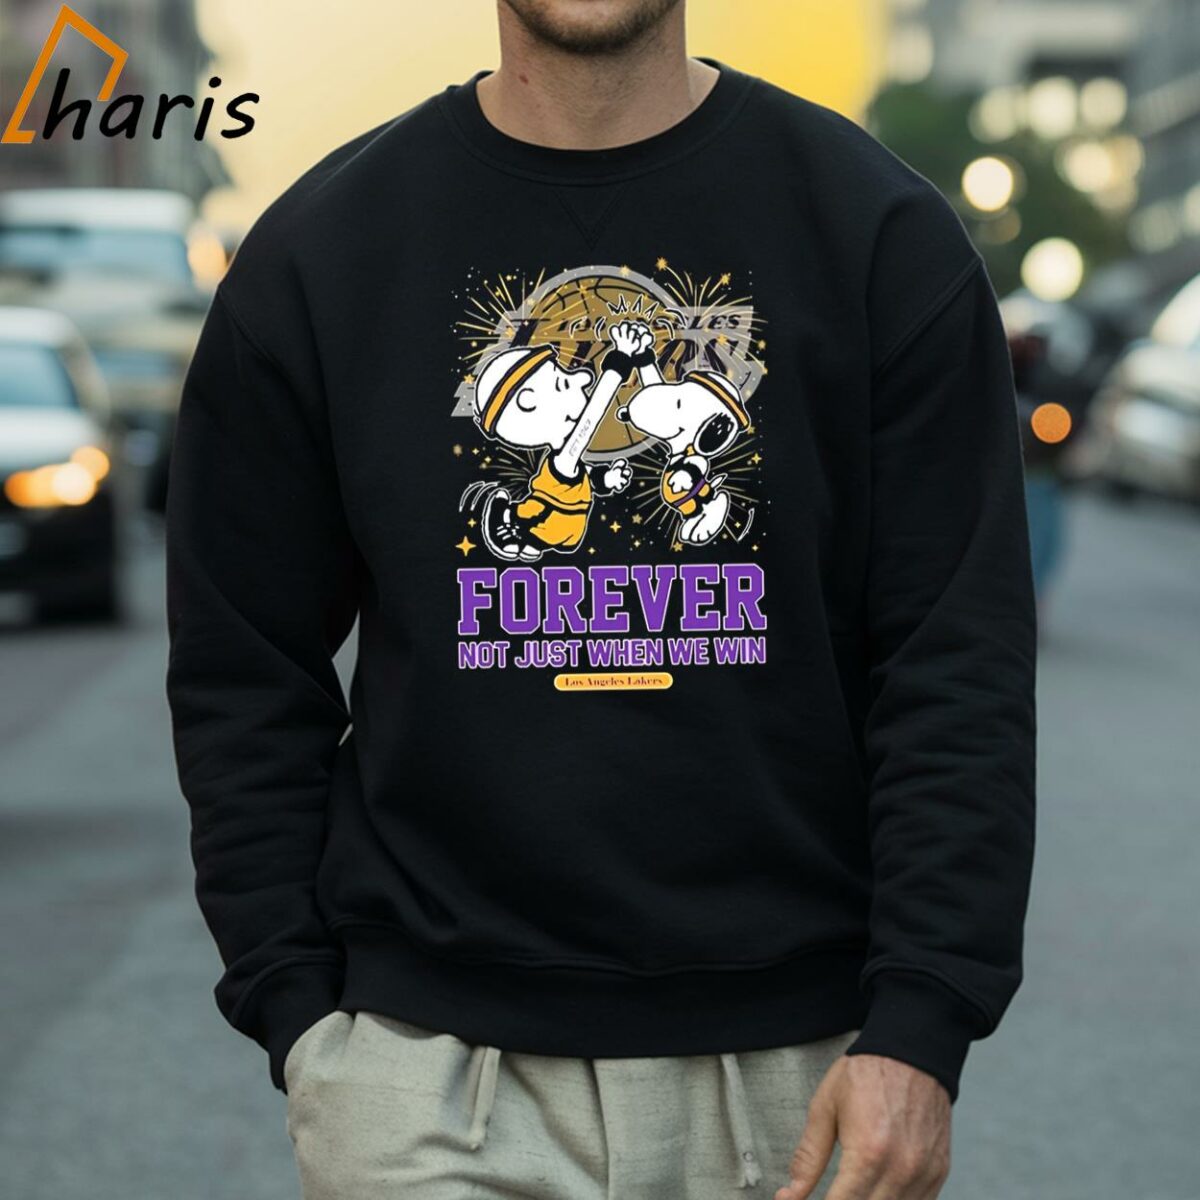 Peanuts Snoopy And Charlie Brown High Five Los Angeles Lakers Forever Not Just When We Win Shirt 4 Sweatshirt